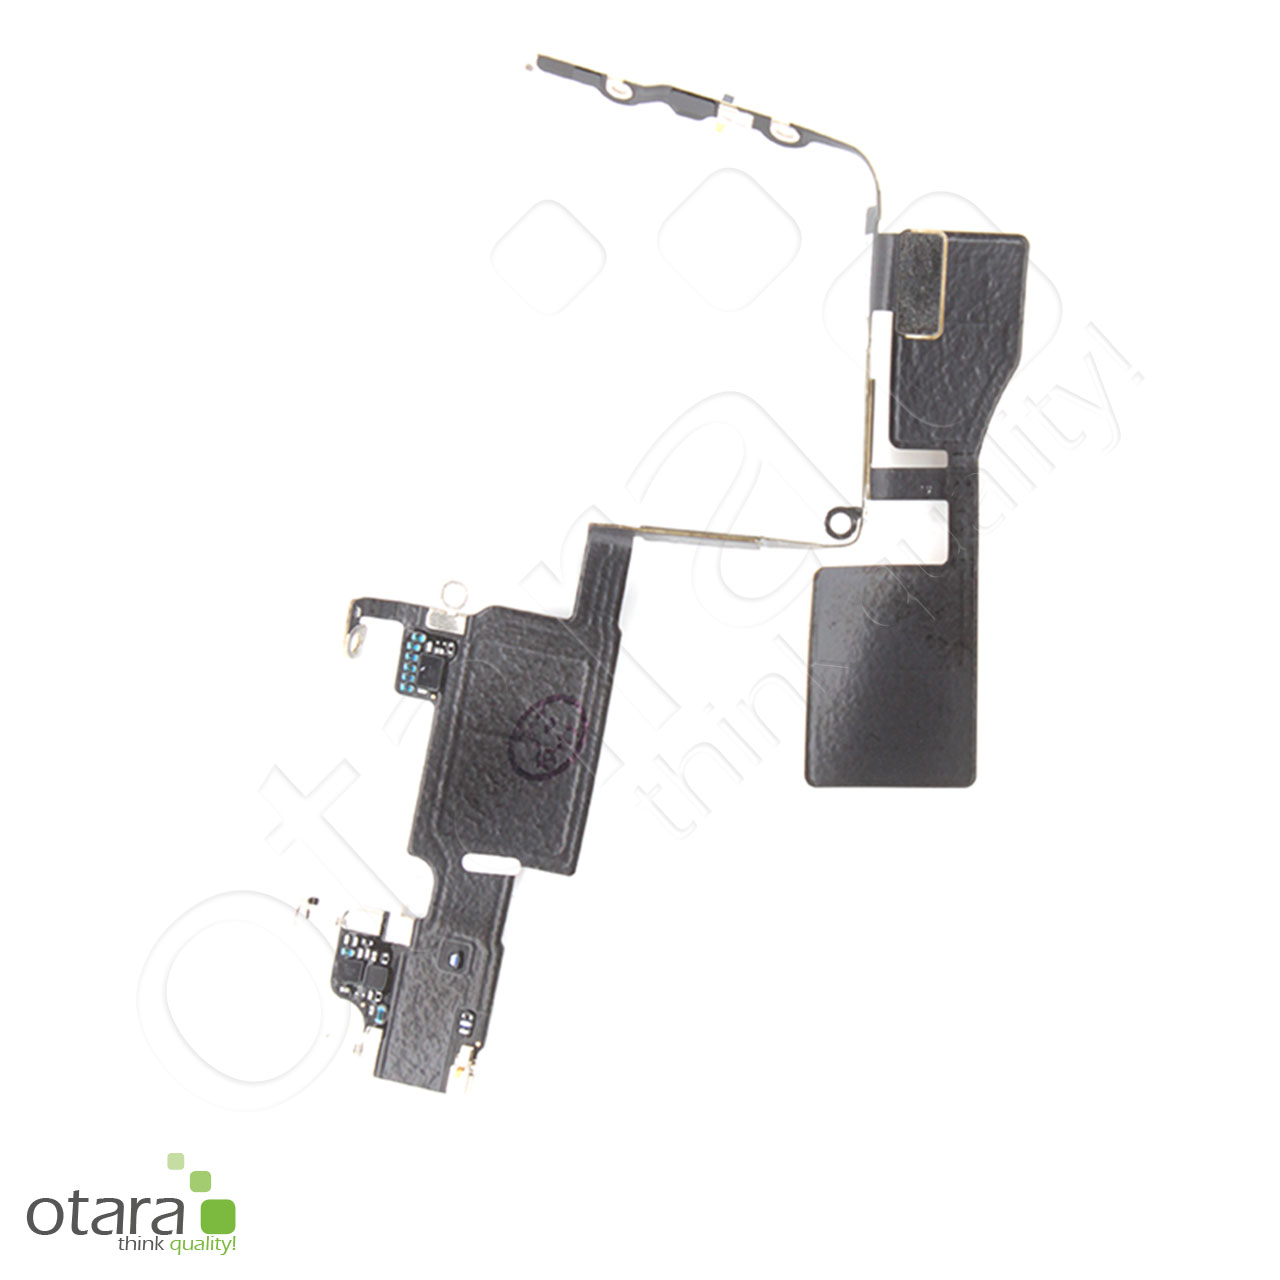 WiFi and GPS/GSM antenna +flex for iPhone 11 Pro Max | small parts | iPhone 11 Pro Max | iPhone | otara GmbH - think quality!